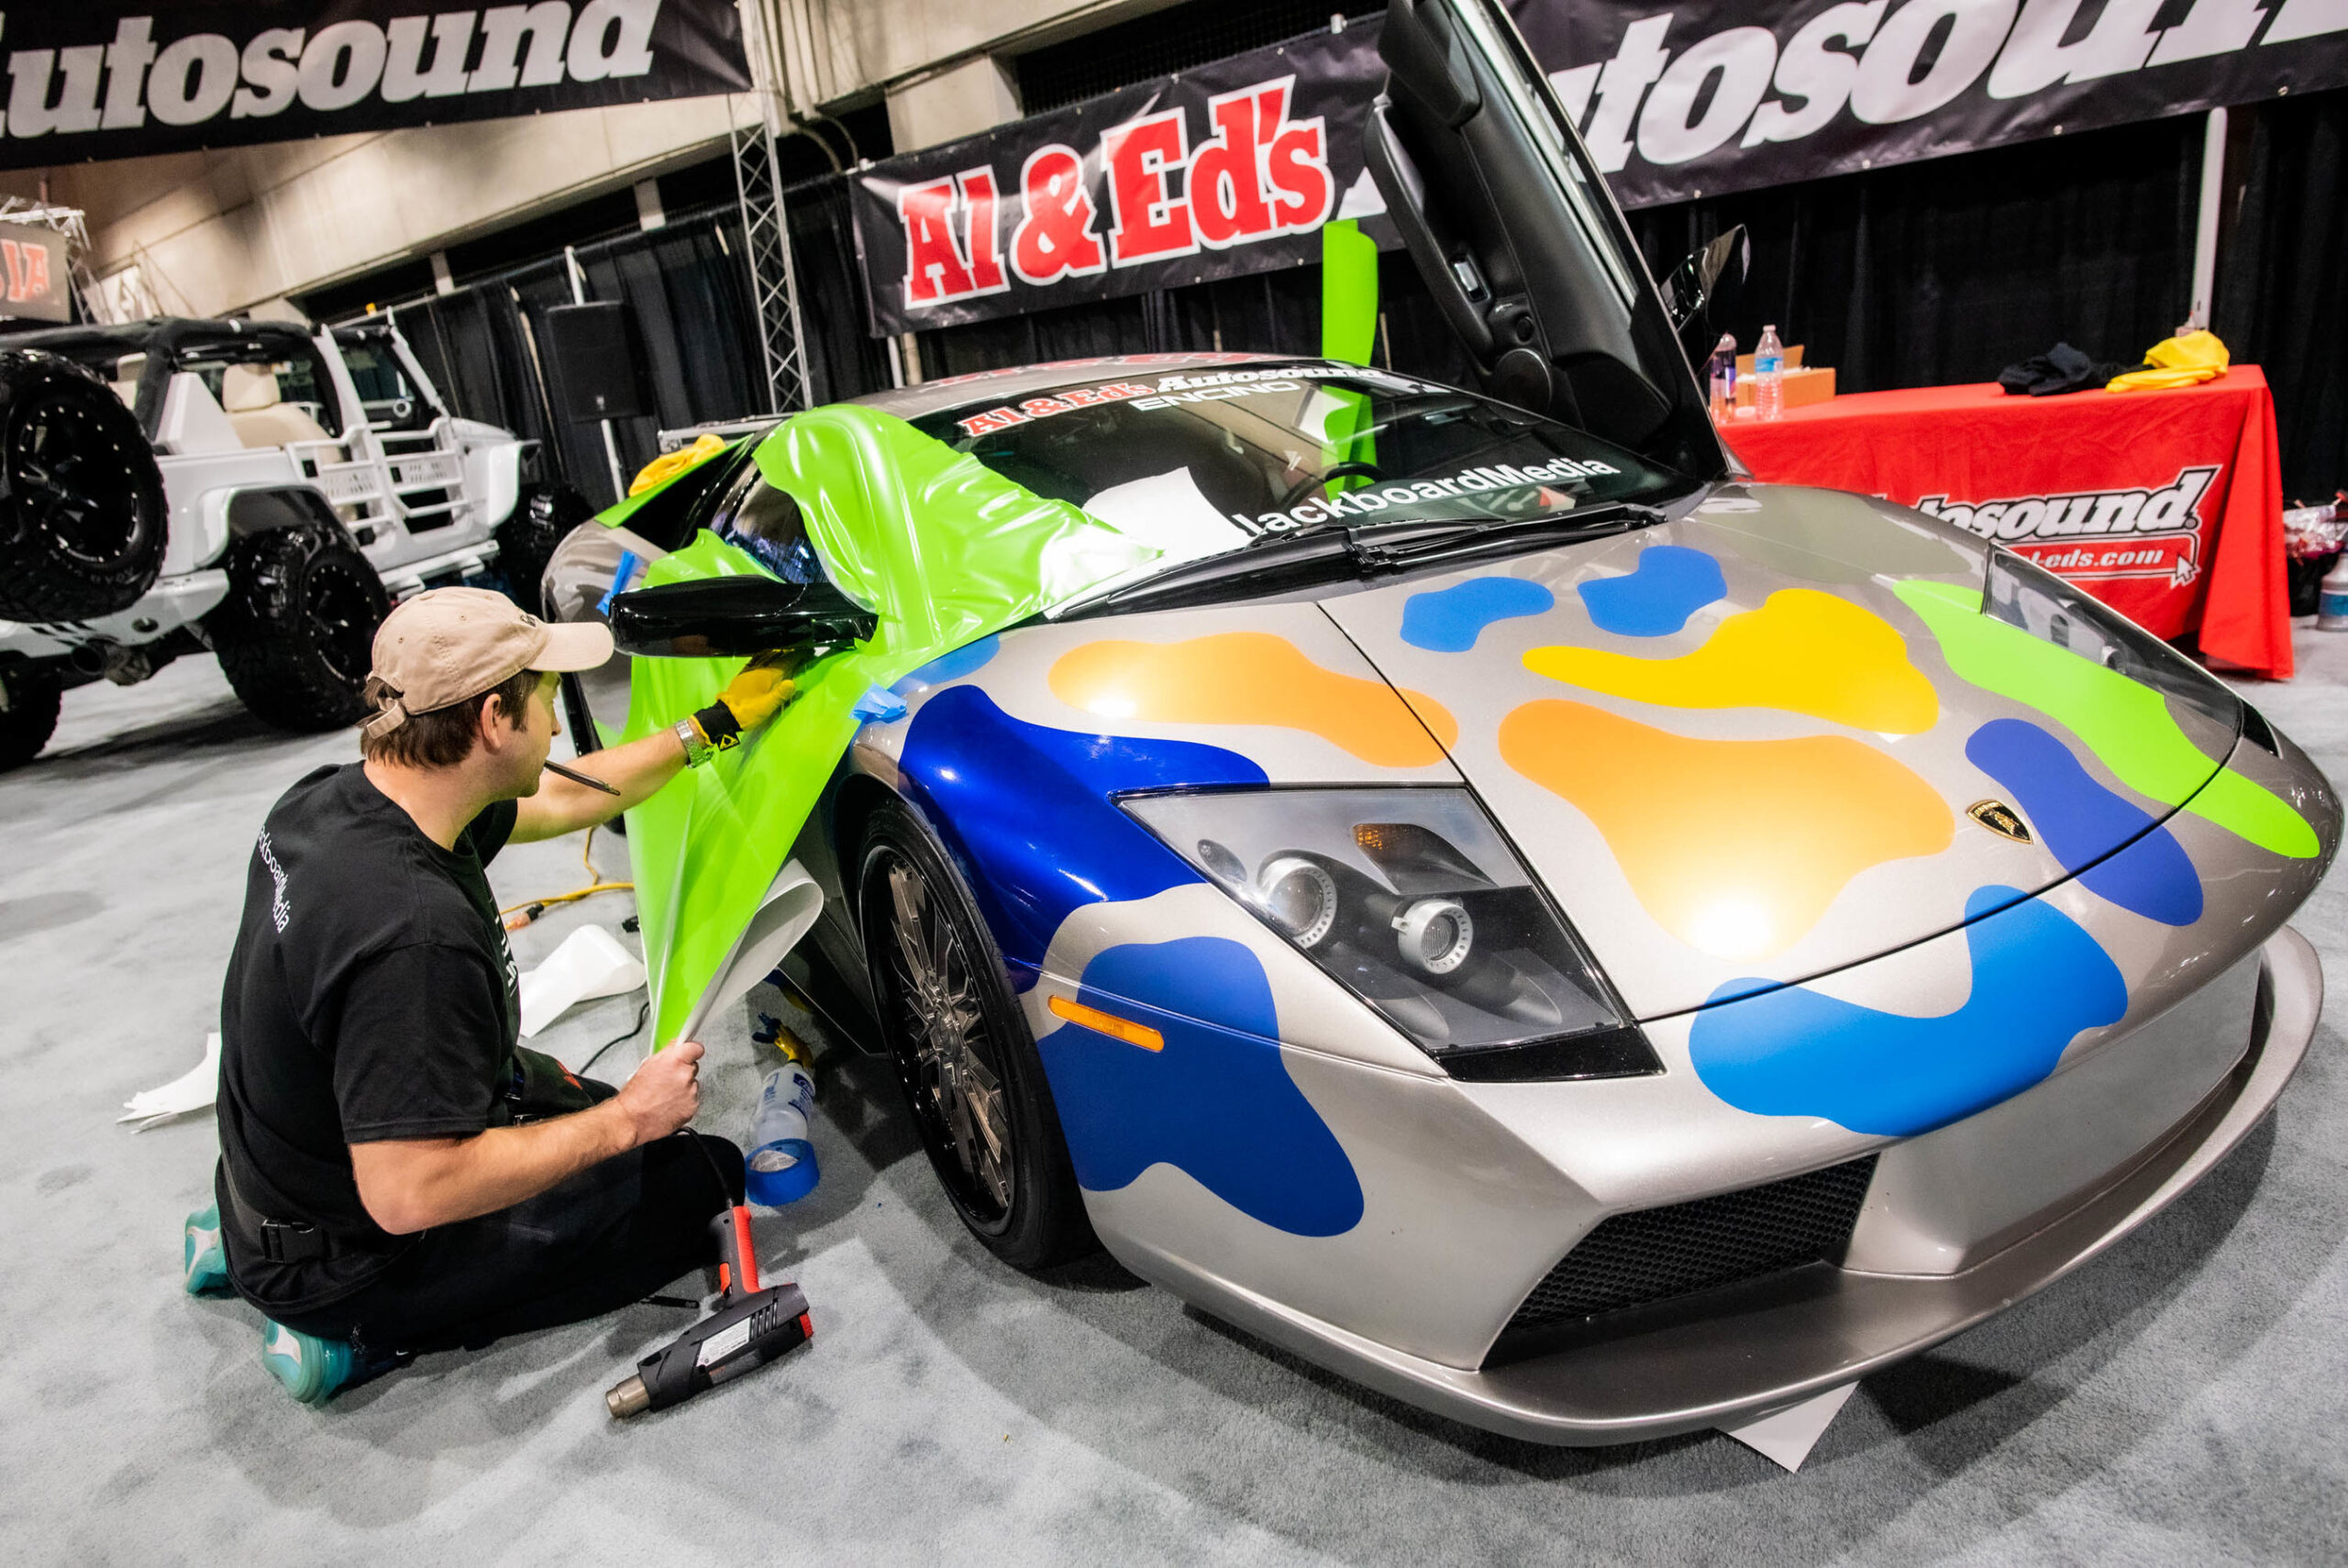 L.A. Auto Show Display to Highlight Aftermarket, California Car Culture | THE SHOP